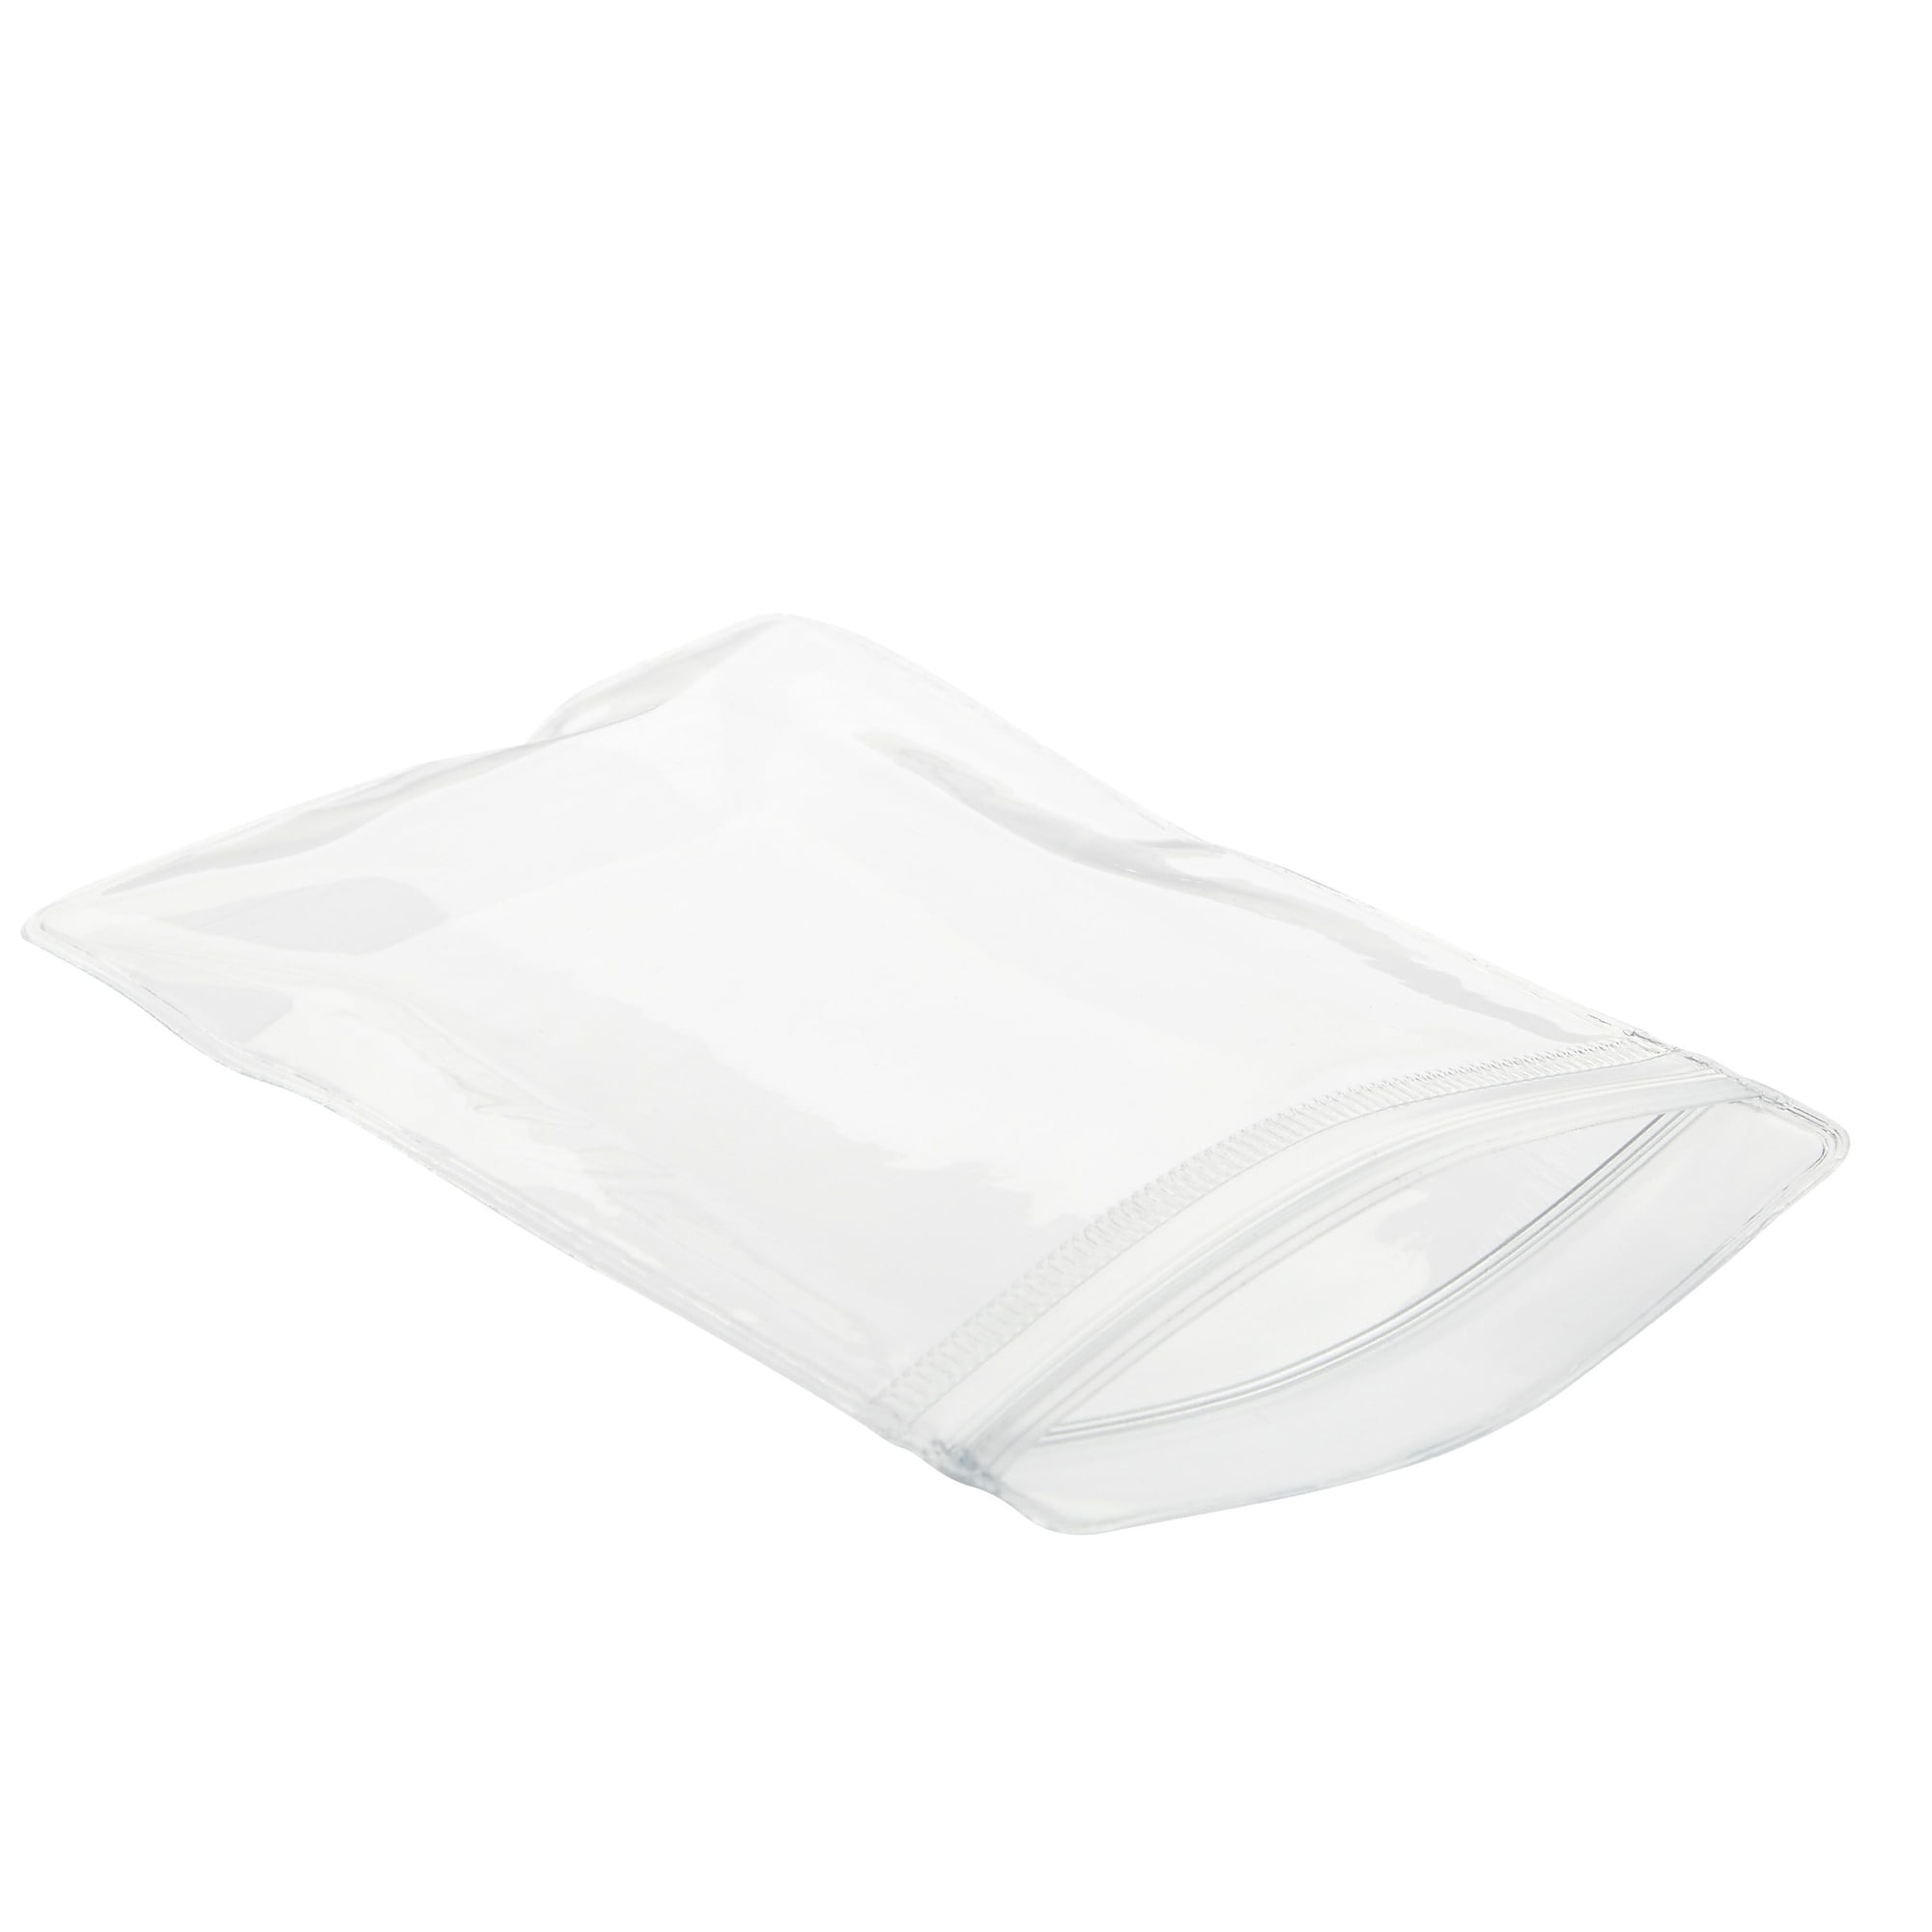 Wholesale 100 Pack Mini Small Plastic Zip Bags For Jewelry, Herbs, And Small  Items From High420, $2.87